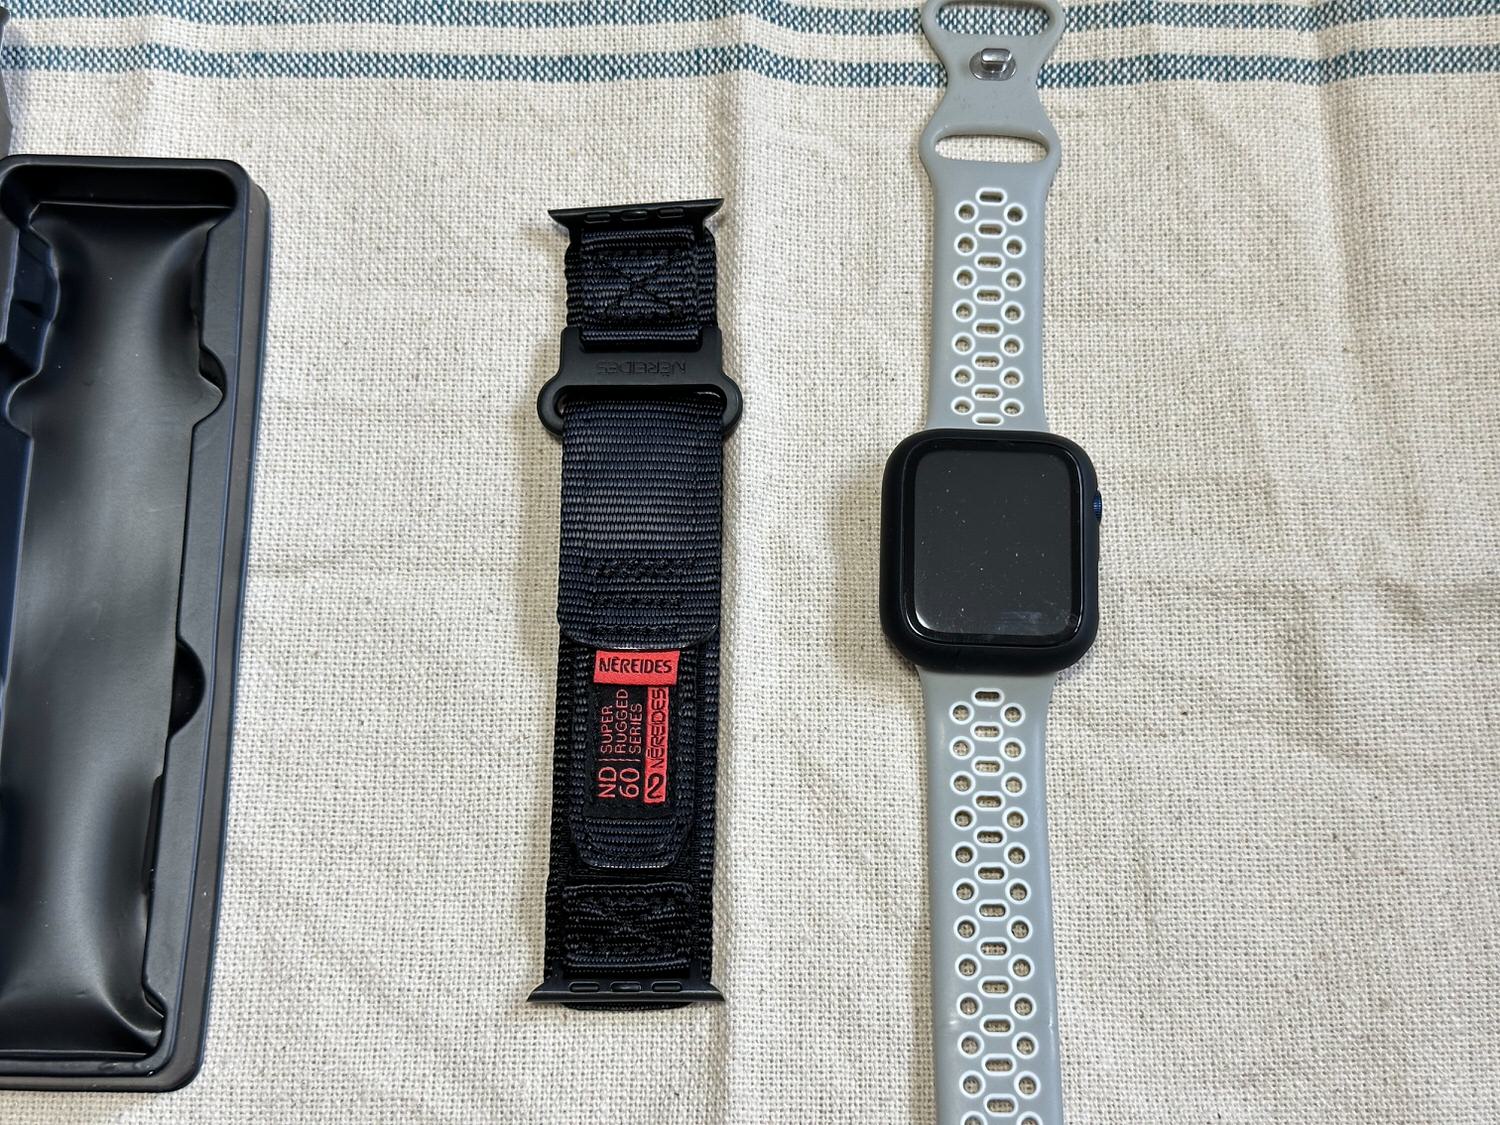 Apple watch new band 002 02